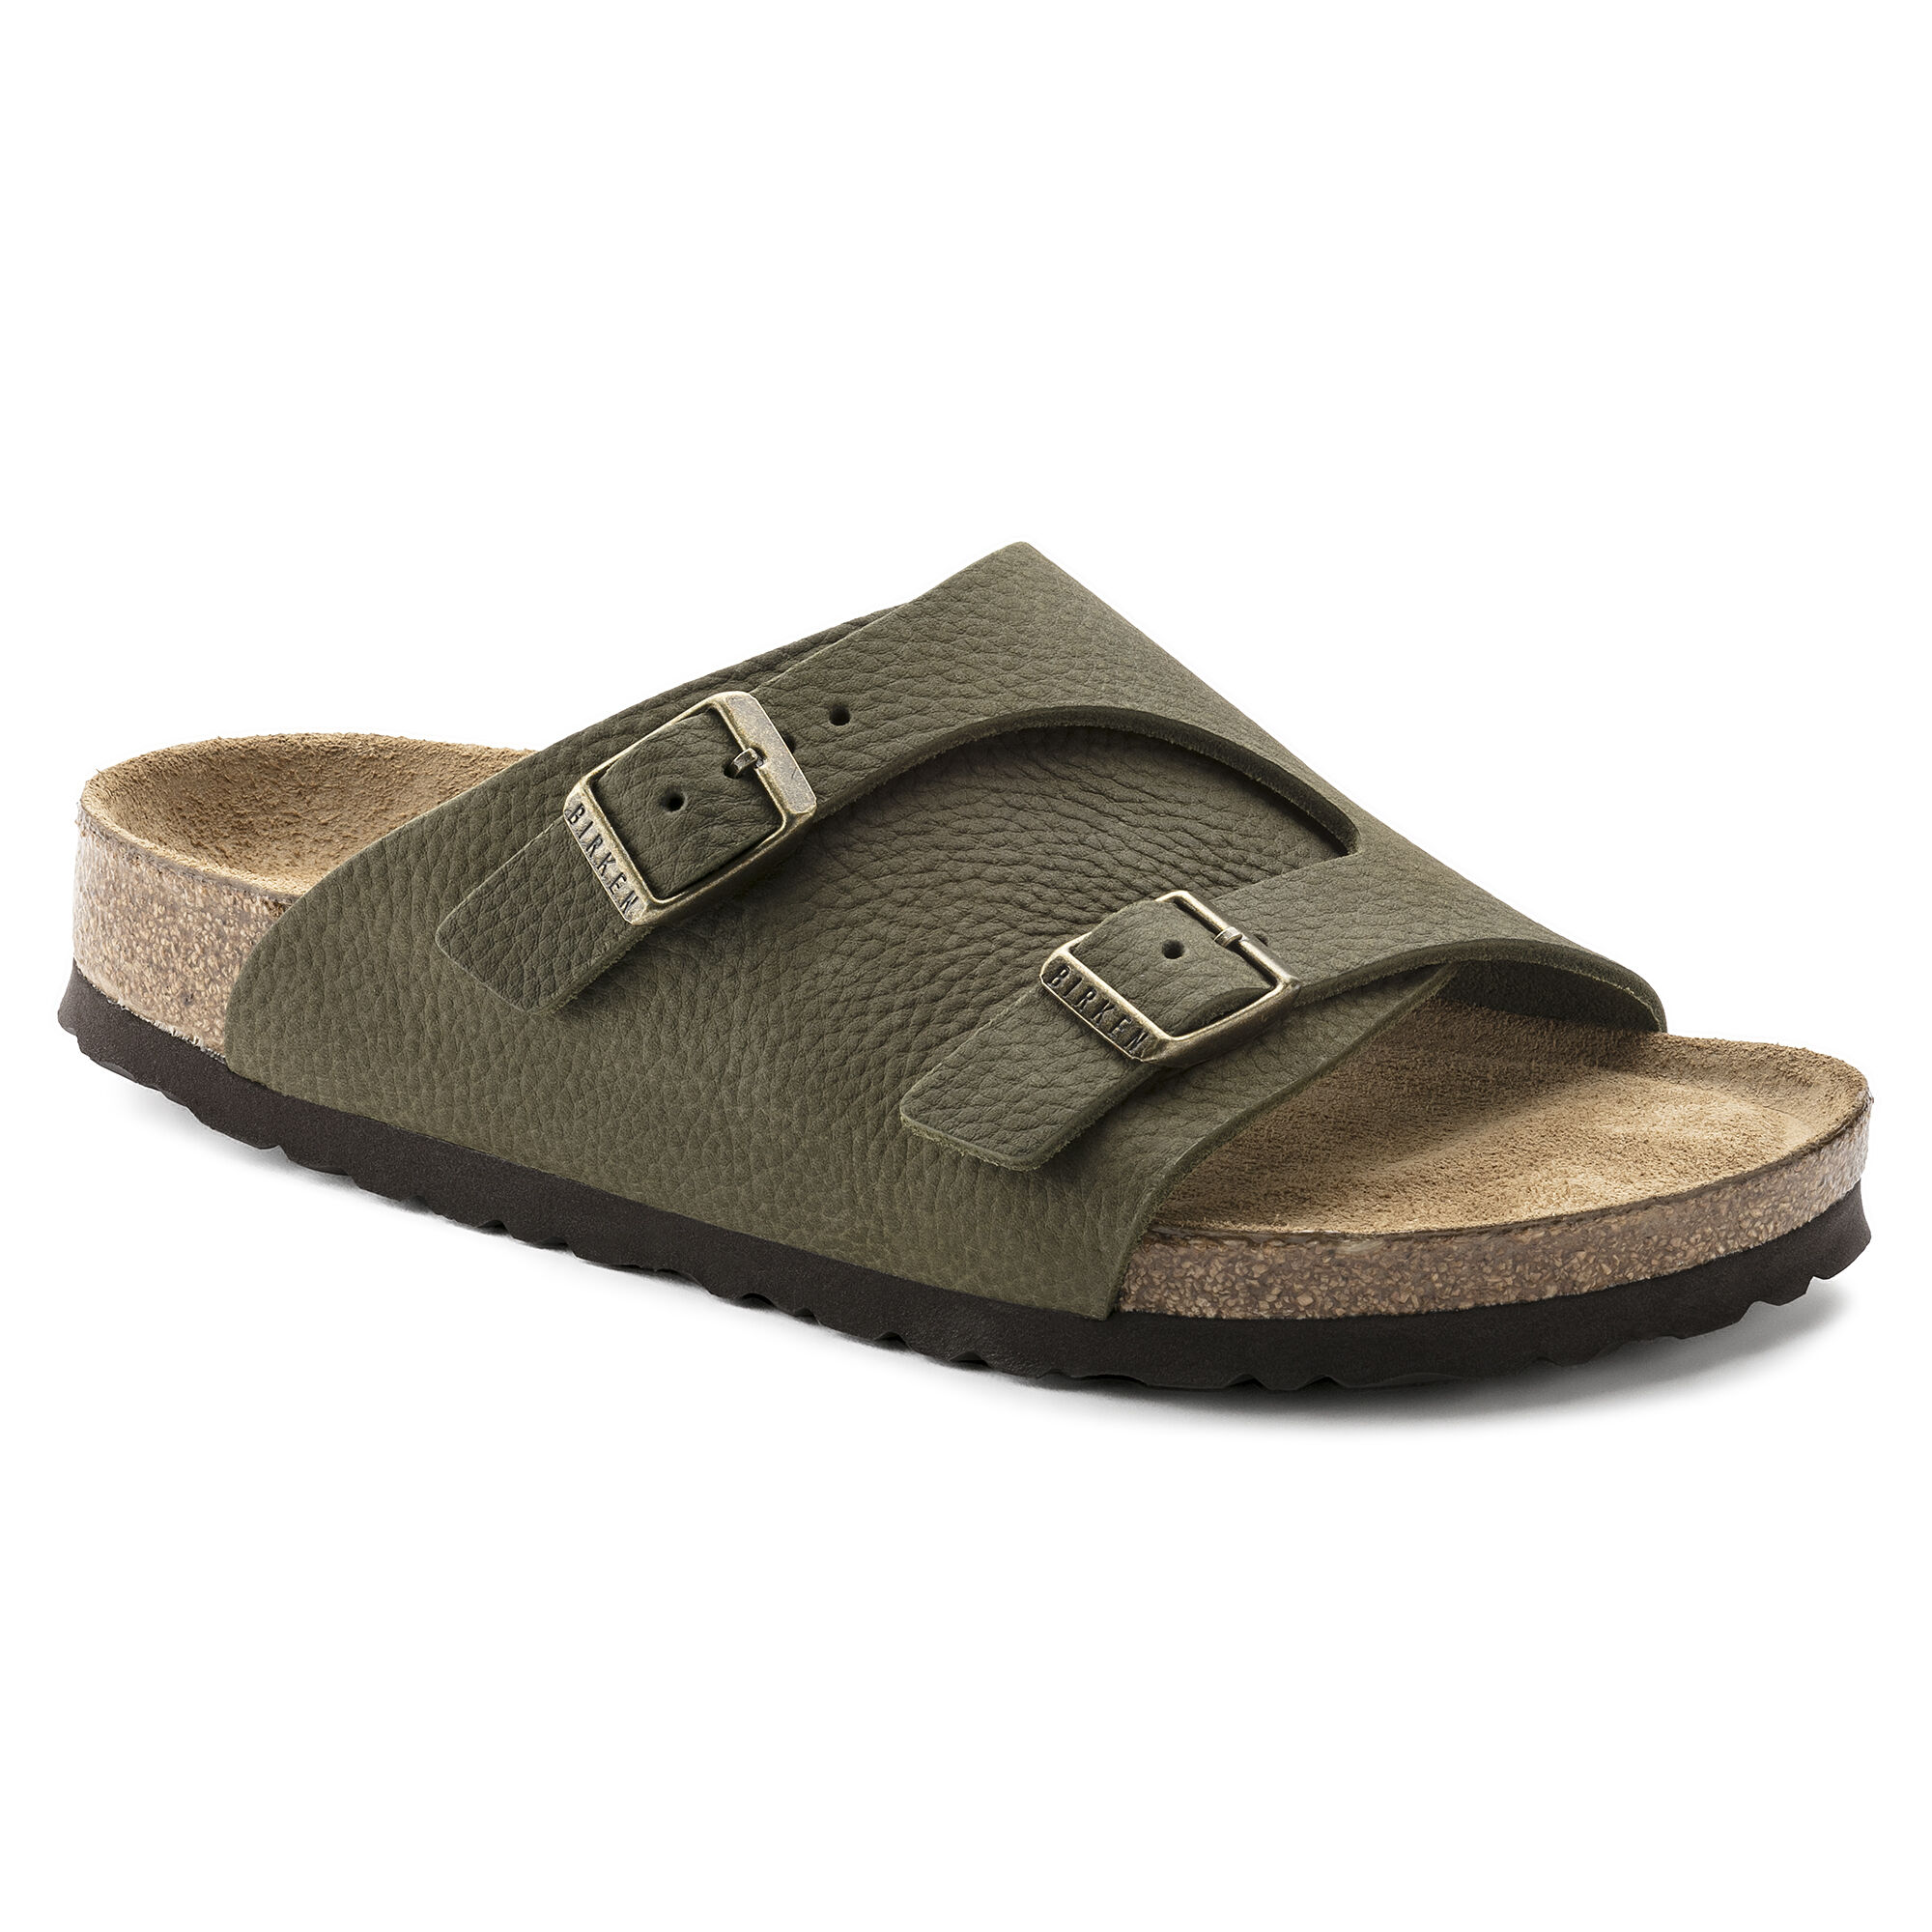 Zürich Soft Footbed / チューリッヒ ソフトフットベッド Real Leather ...